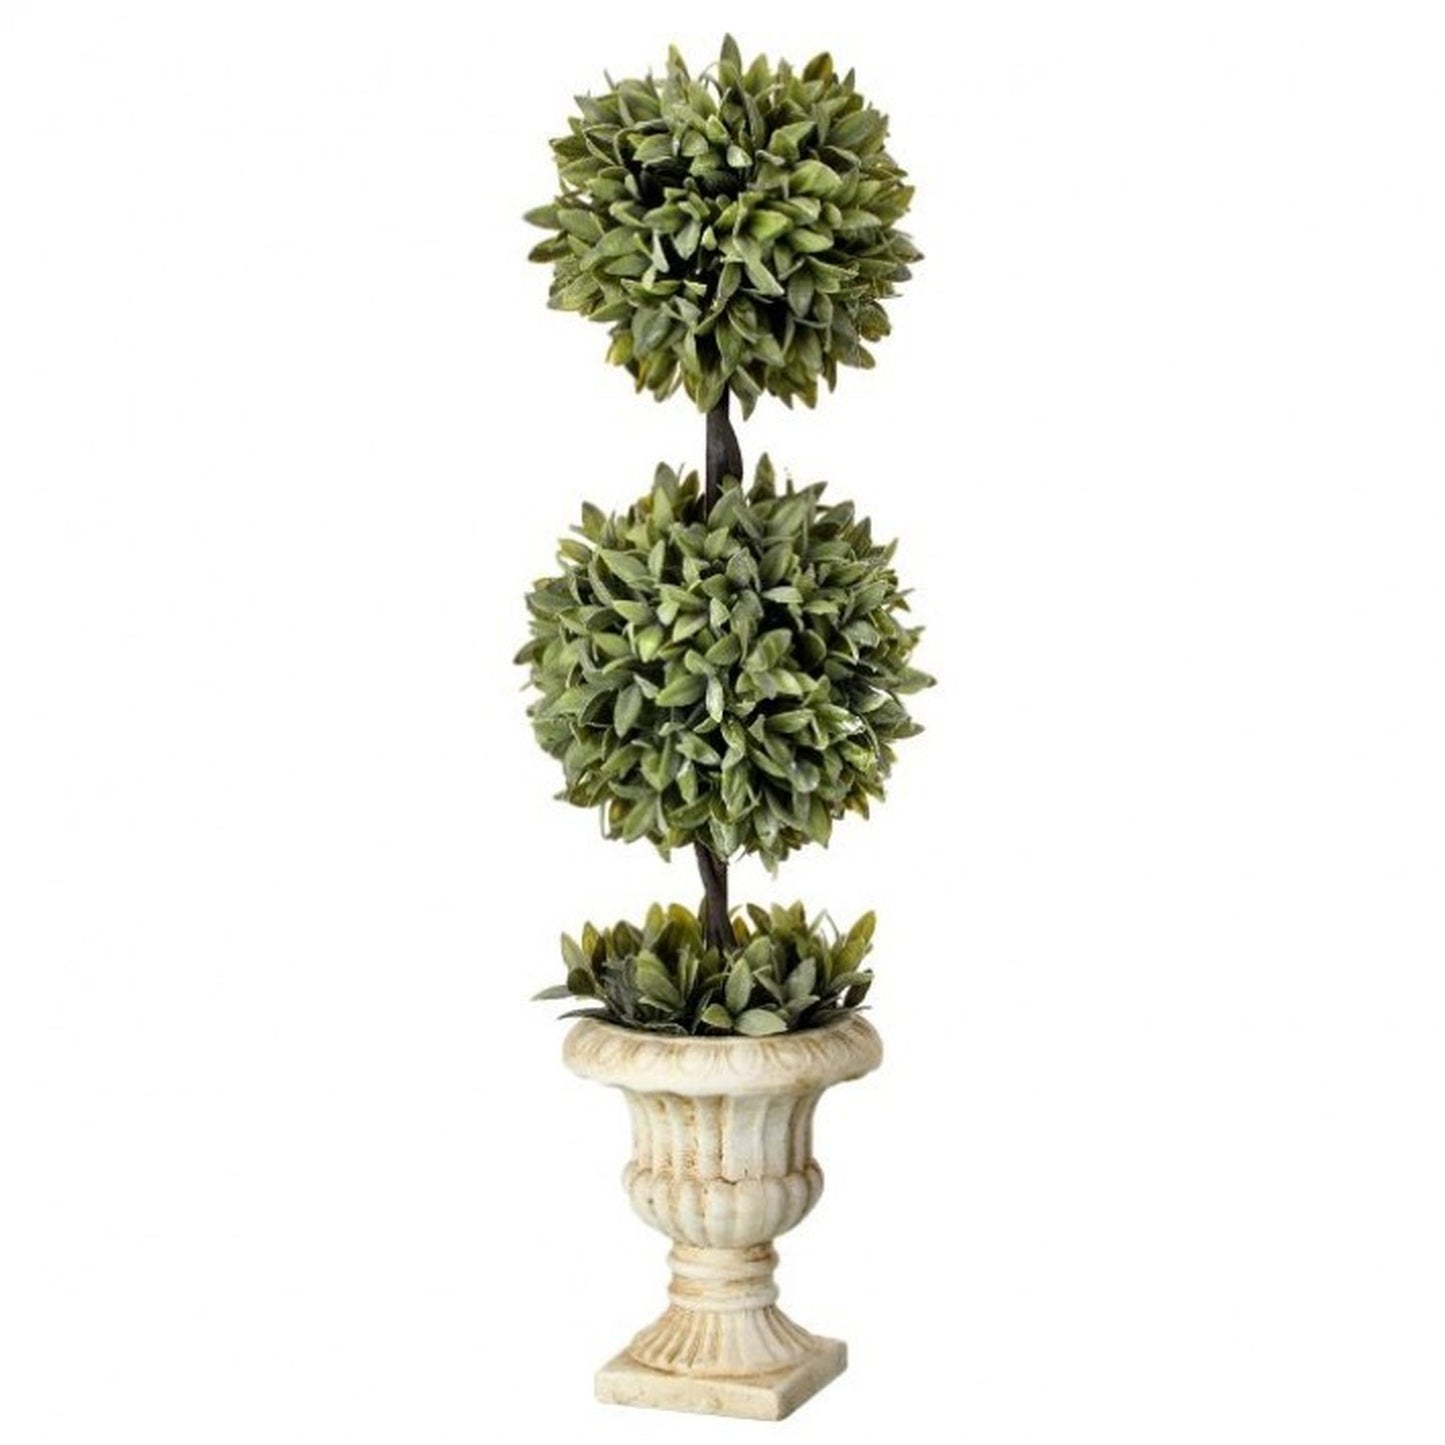 Regency International Potted Plastic Flocked Sage Double Ball Topiary 26"